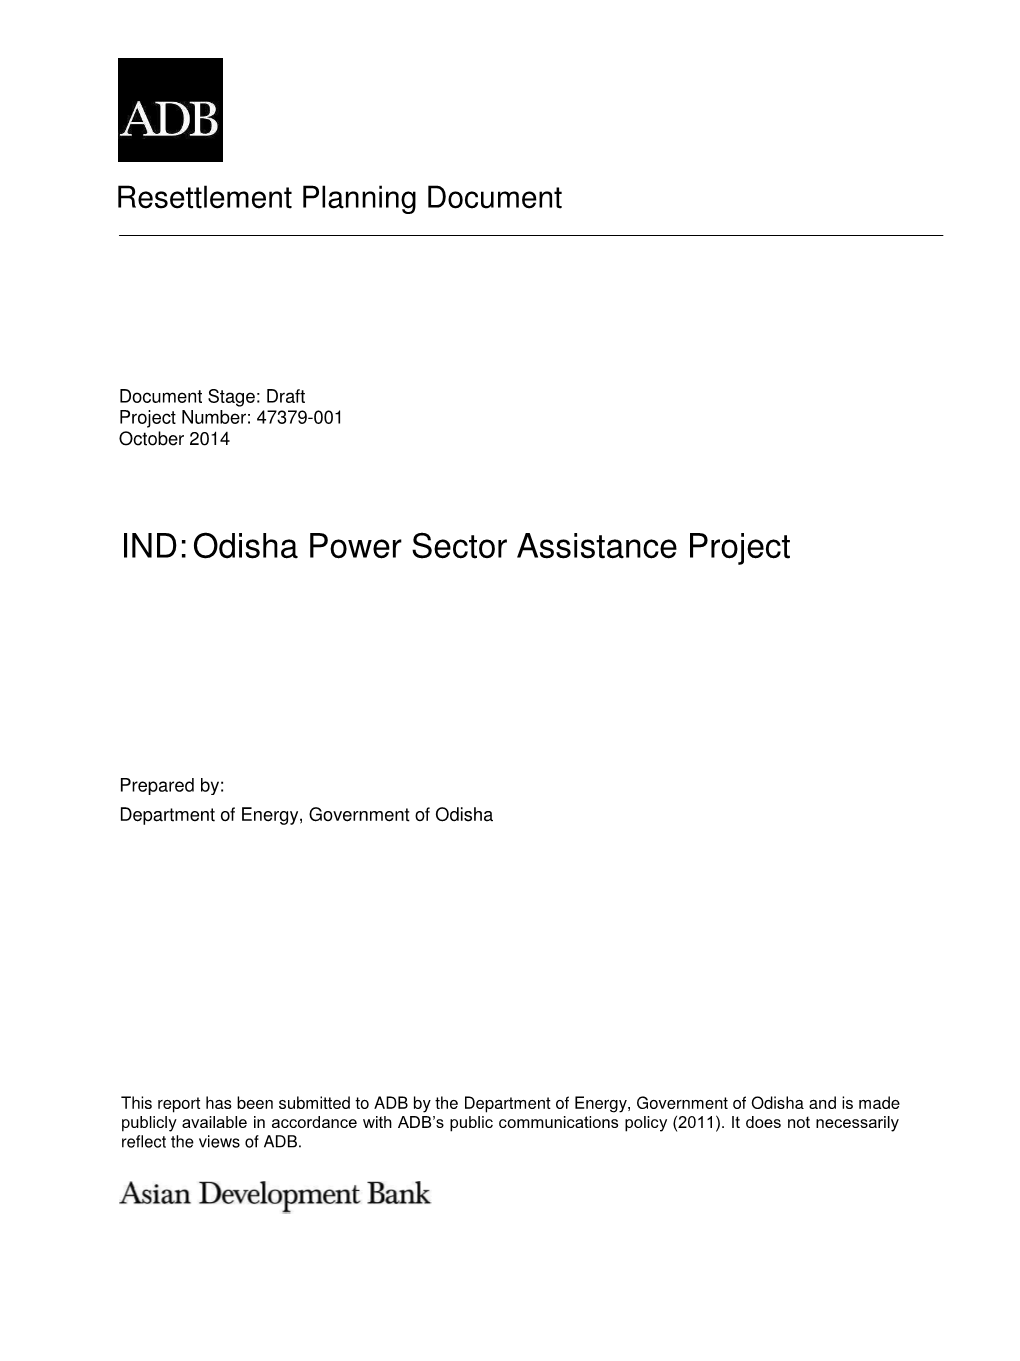 Odisha Power Sector Assistance Project